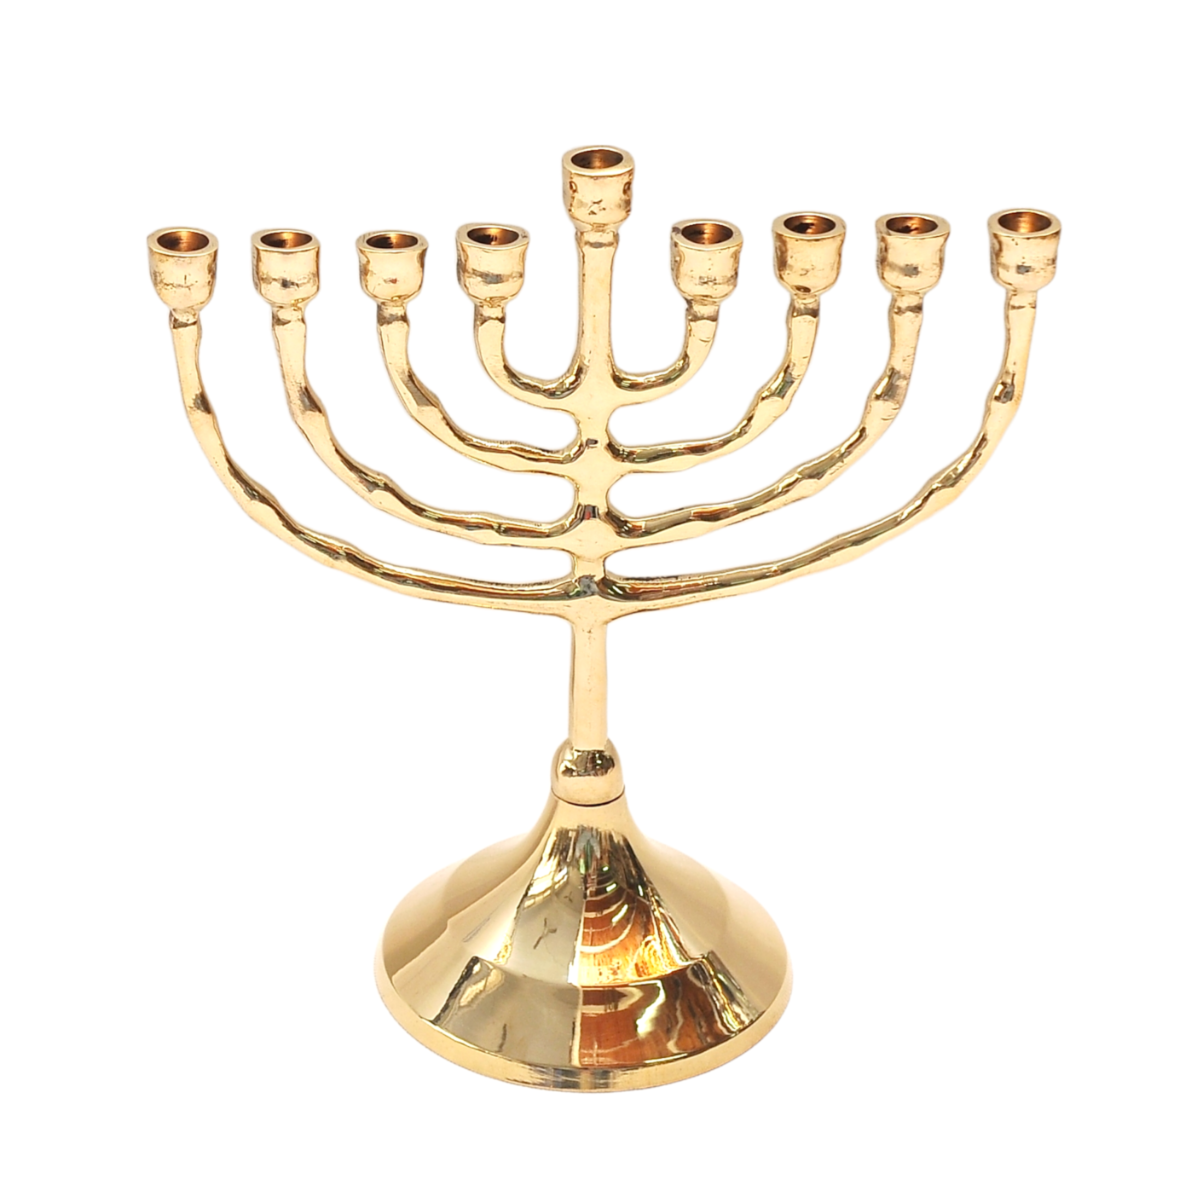 Authentic Temple Menorah HANUKKAH Gold Plated Candle Holder Israel